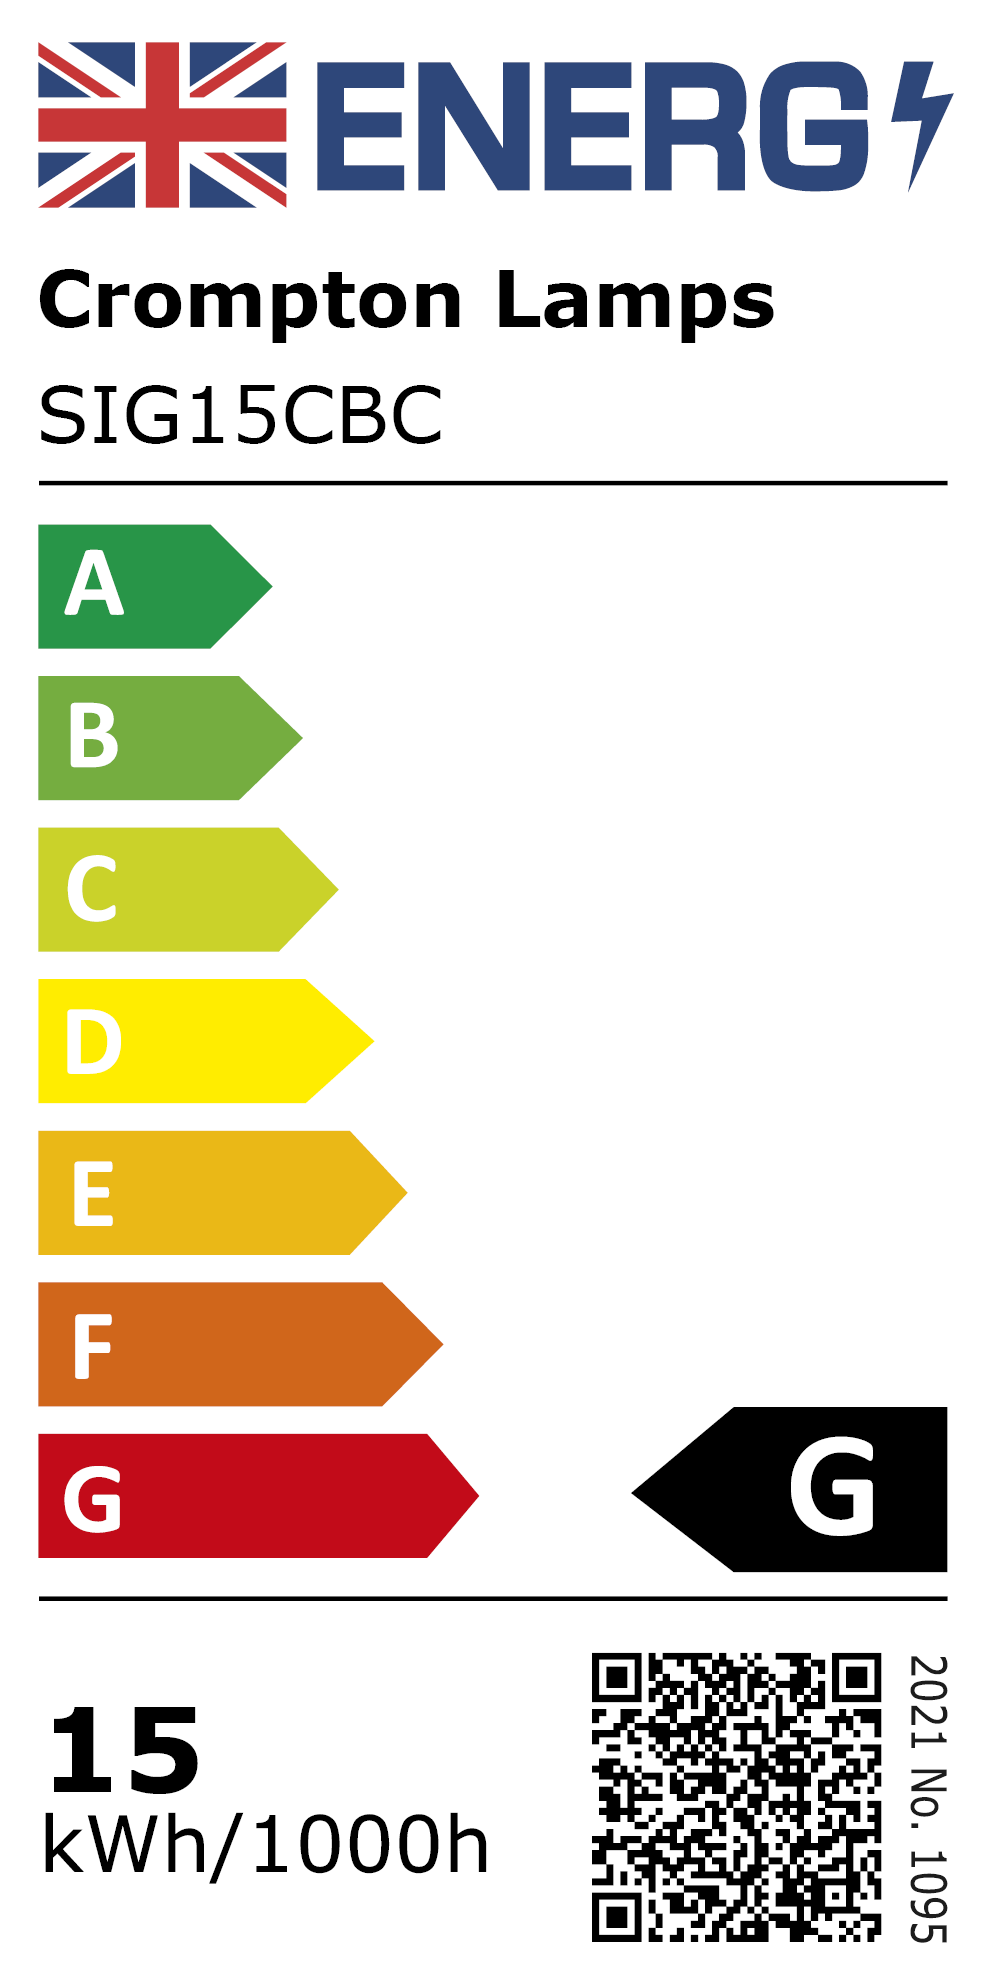 New 2021 Energy Rating Label: Stock Code SIG15CBC